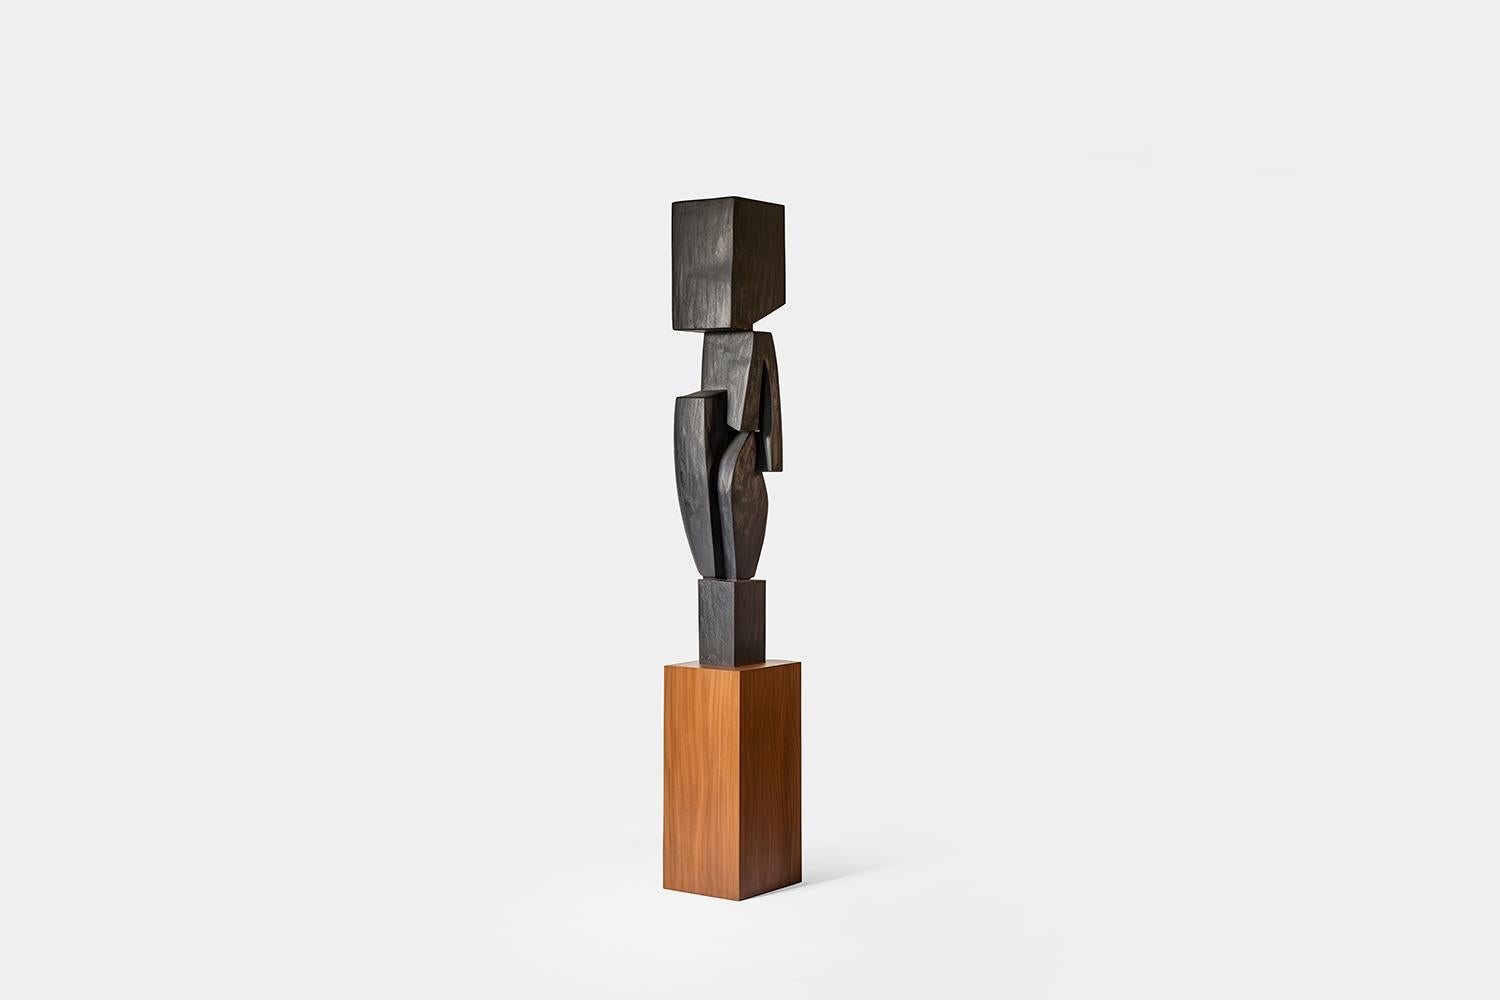 Monumental Wooden Sculpture Inspired in Constantin Brancusi Style, Unseen Force 27 by Joel Escalona

This monolithic sculpture, designed by the talented Artist Joel Escalona, is a towering example of beauty in craftsmanship. Hand and digital machine